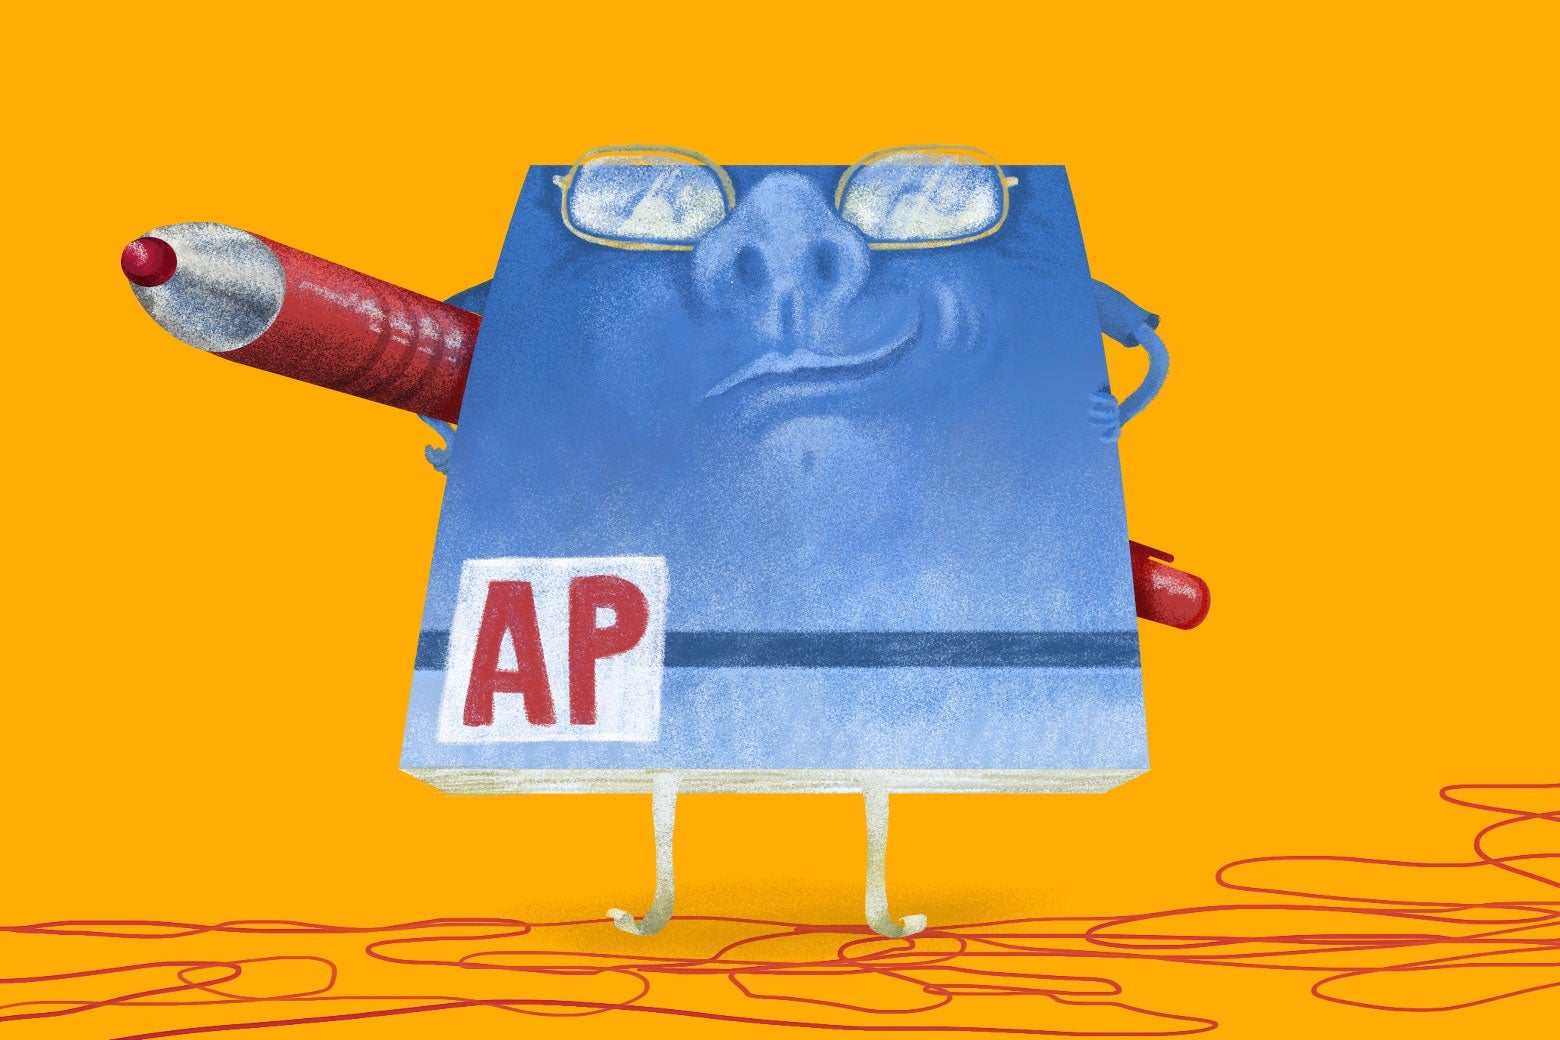 An anthropomorphized AP Stylebook with a smug grin and a red pen.